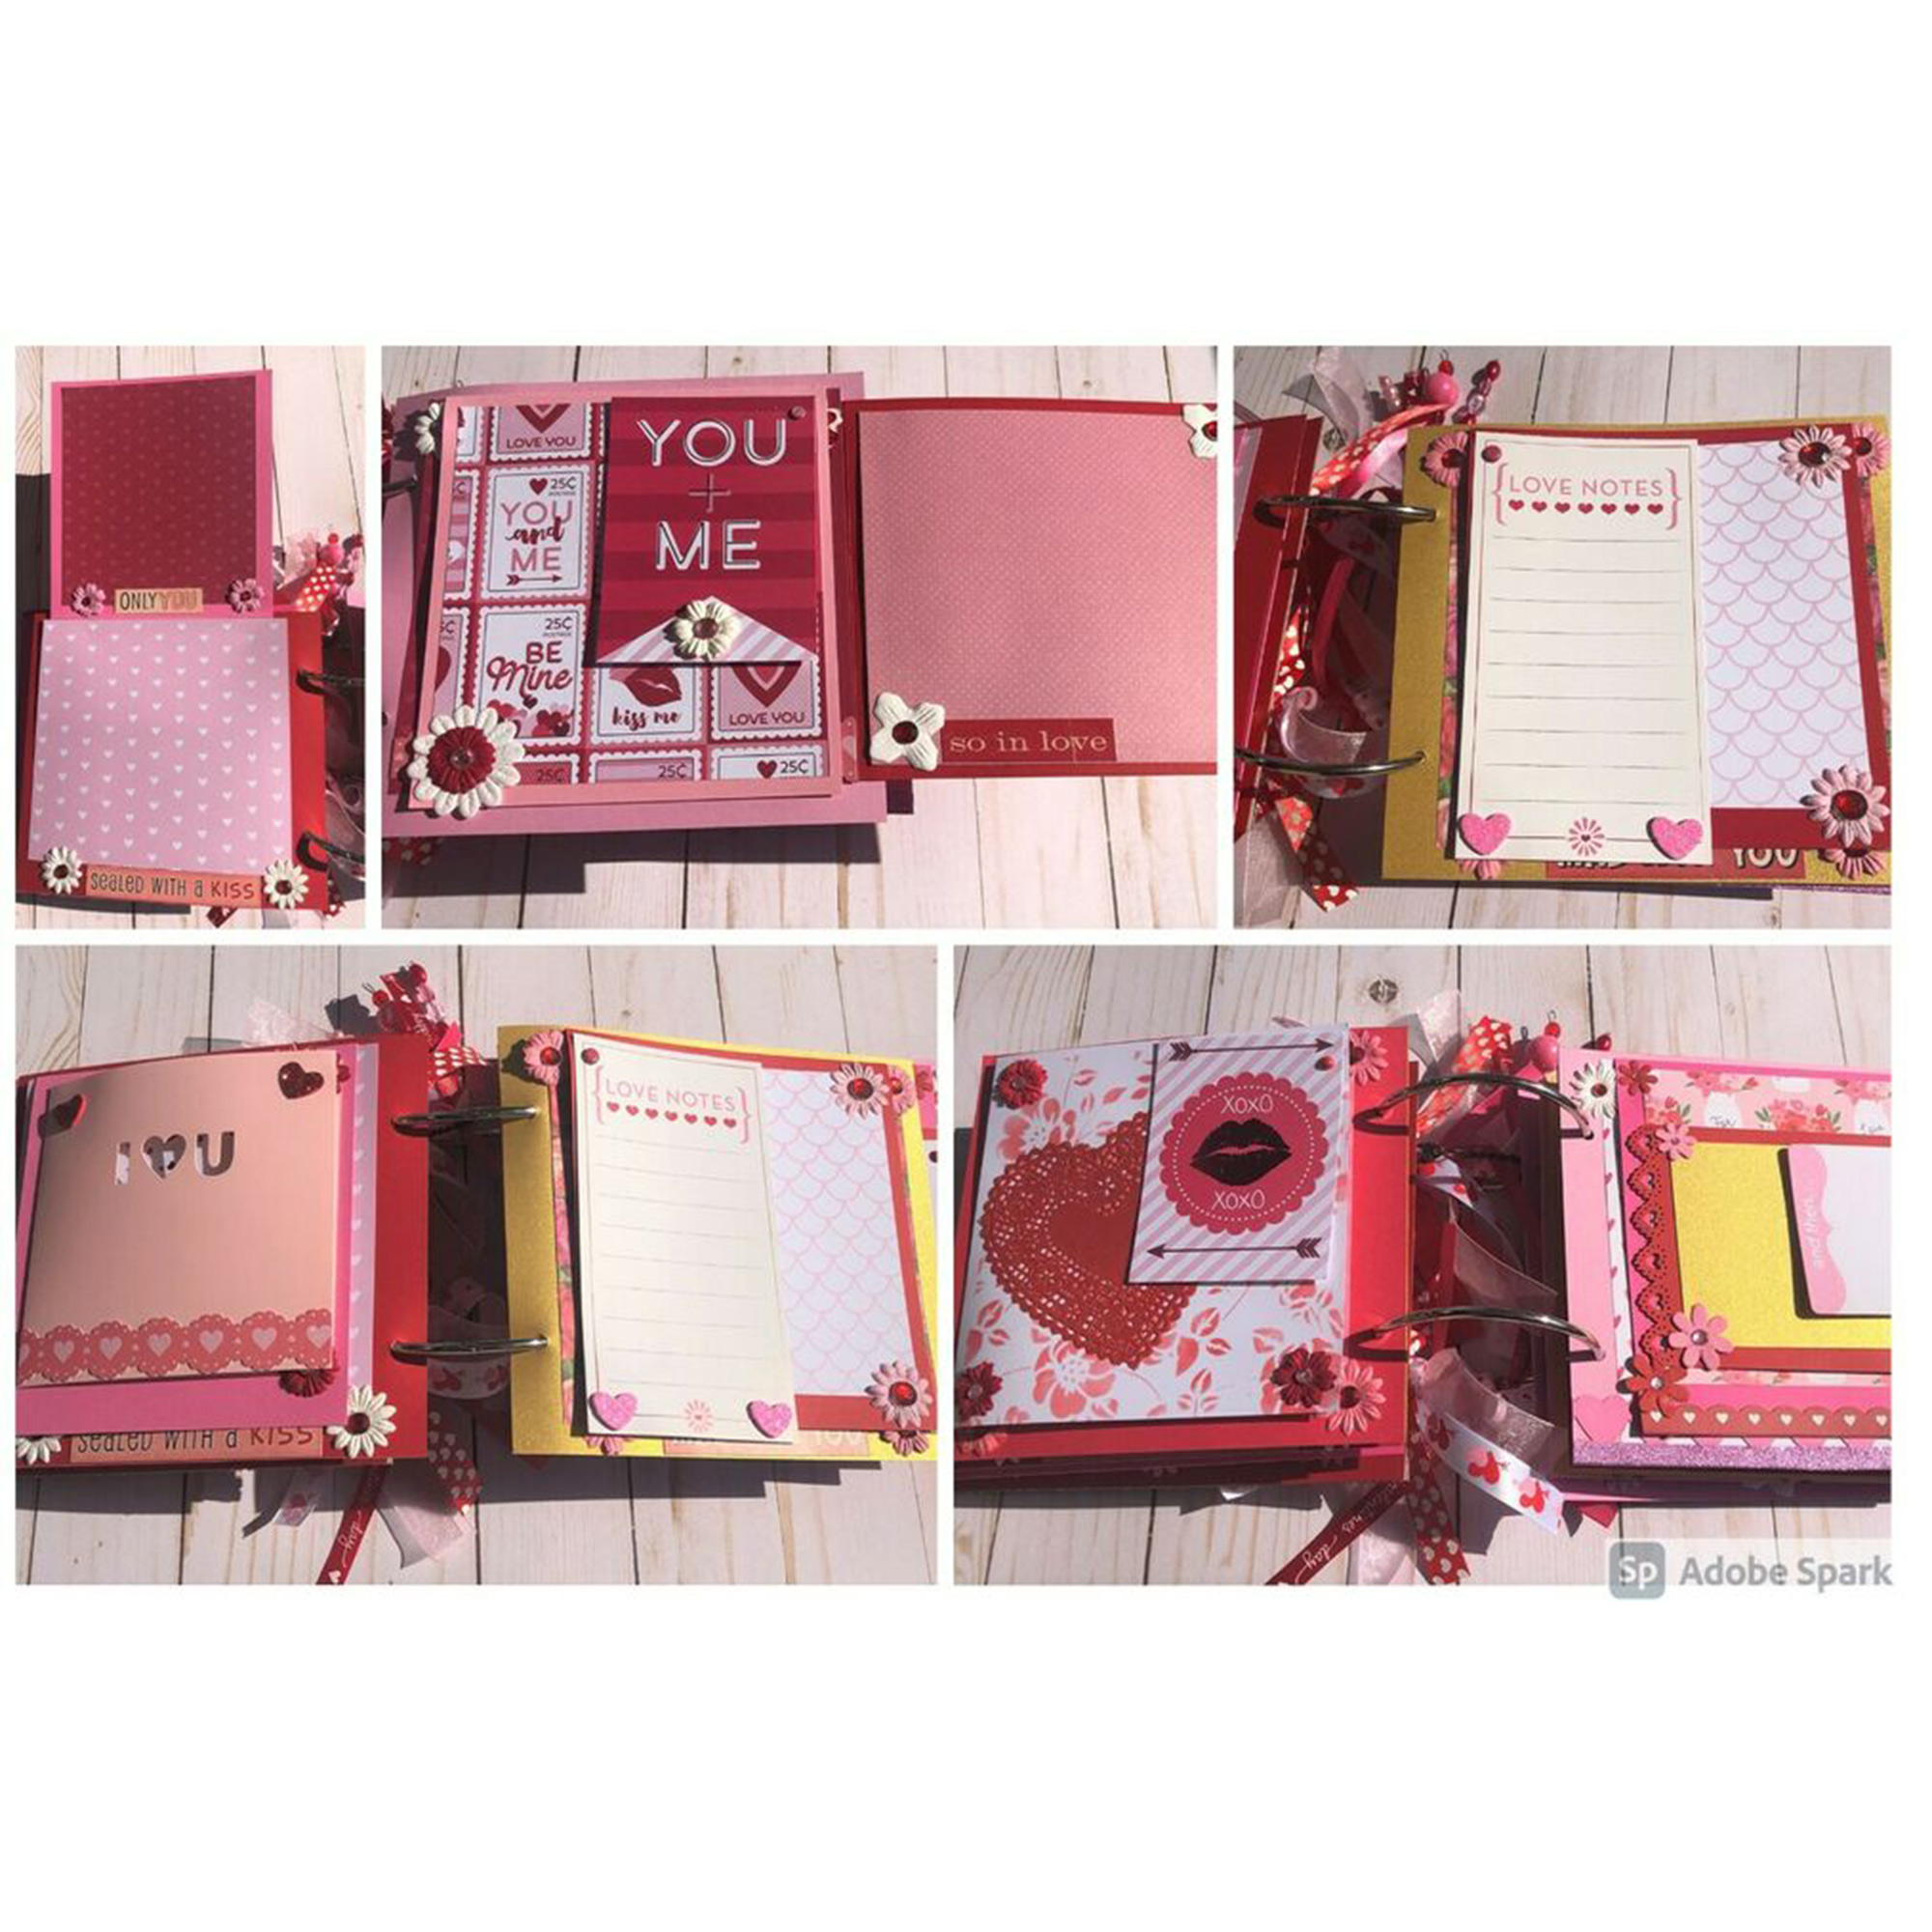 Lelinta DIY Scrapbook Photo Album 7 x 7 inch, Homemade with Love Kit 18 Pages Red Scrapbook Paper with Scrapbooking Kits Suitable for Anniversary